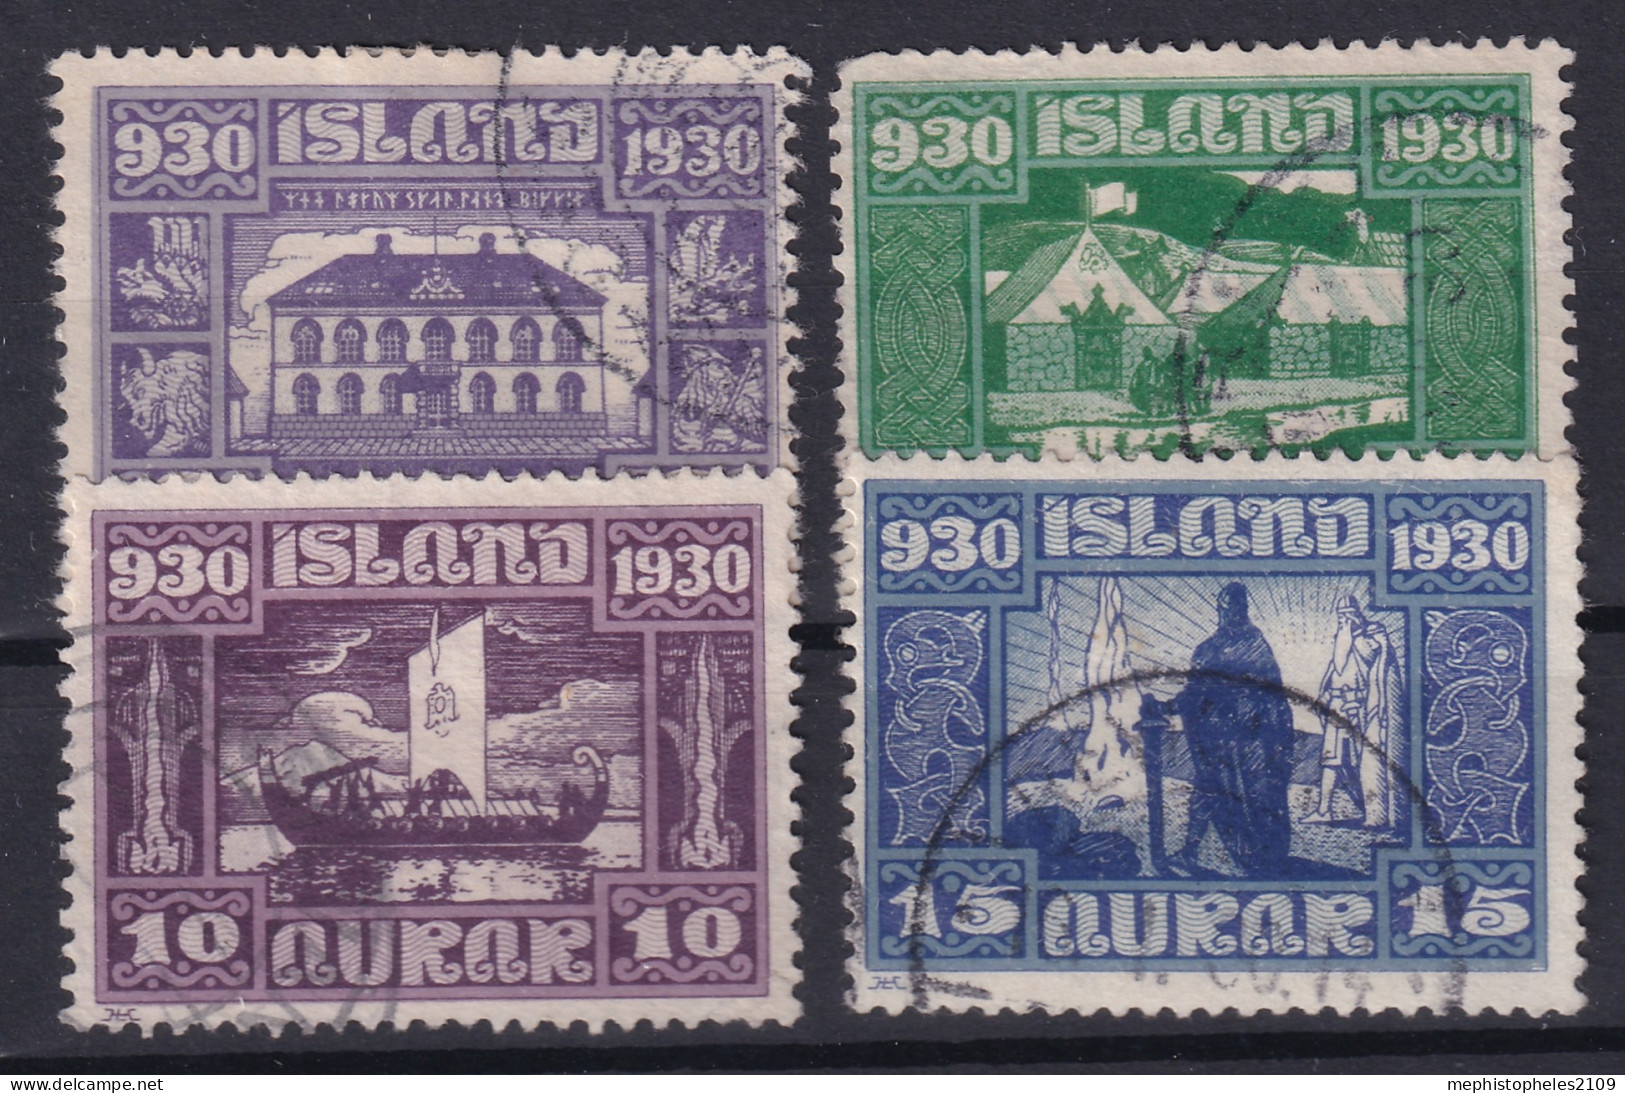 ICELAND 1930 - Canceled - Sc# 152, 154, 155, 156 - Used Stamps